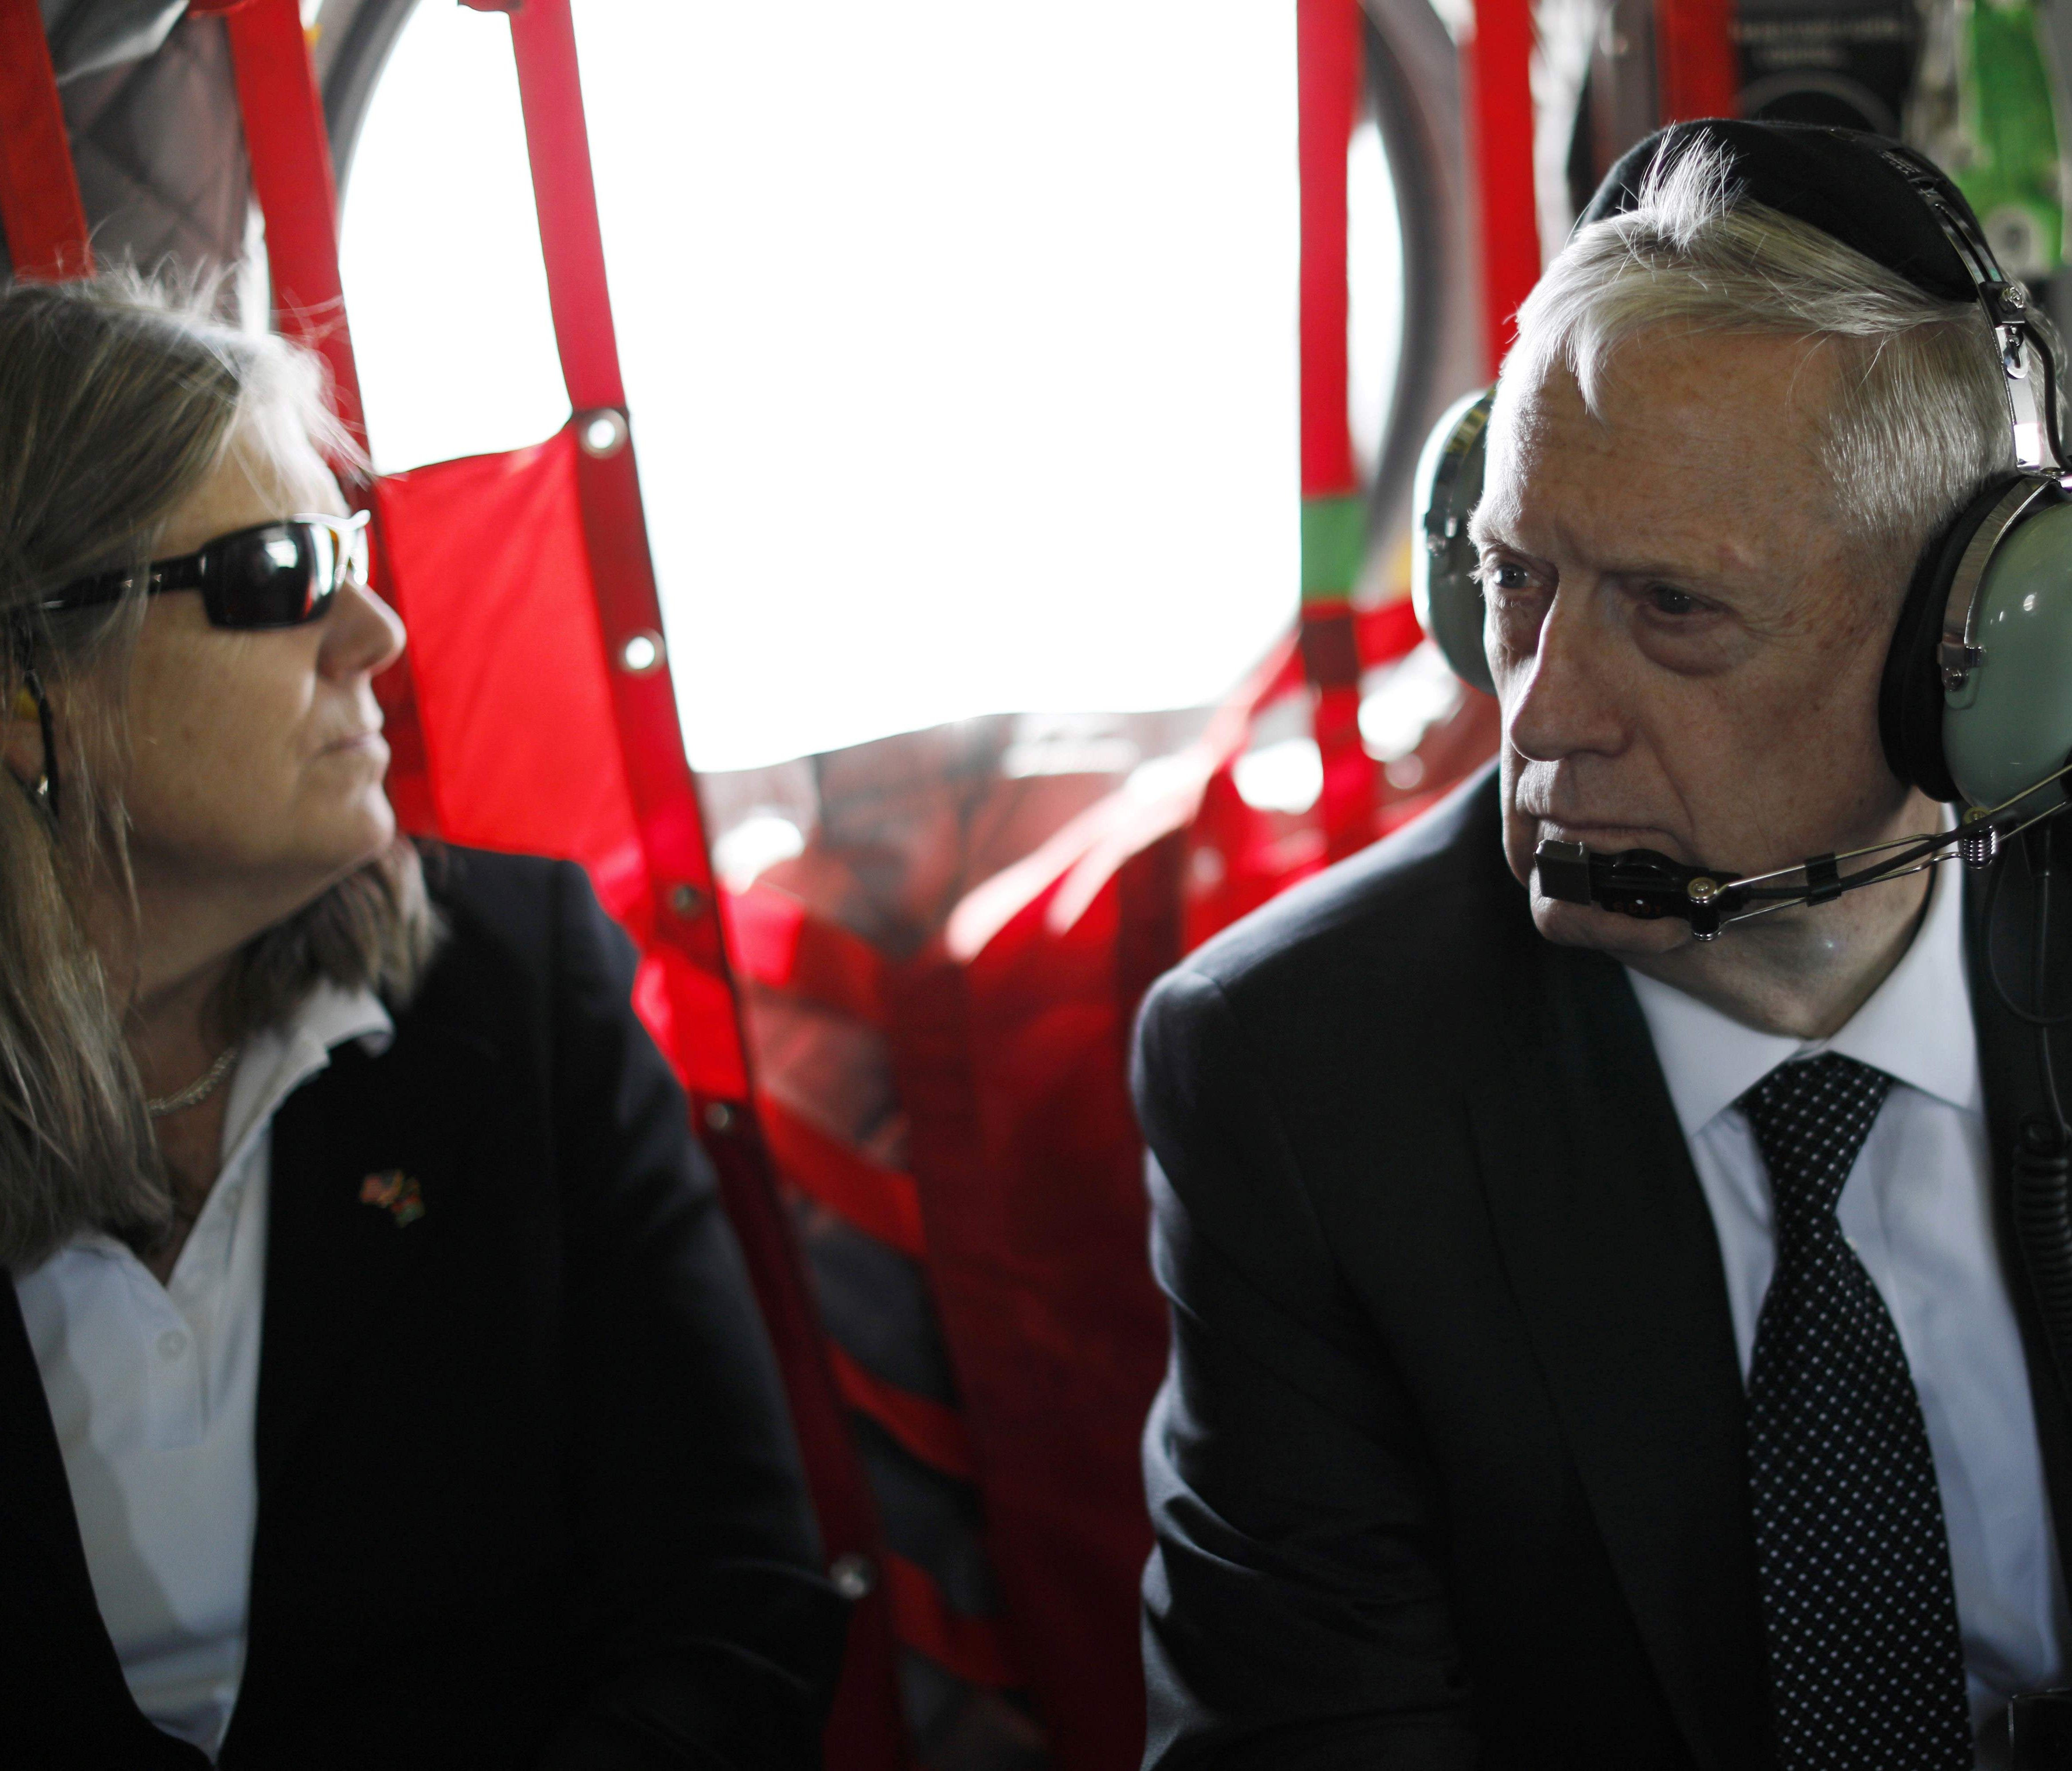 Defence Secretary Jim Mattis and senior adviser Sally Donnelly arrive by helicopter at Resolute Support headquarters in the Afghan capital Kabul on April 24, 2017.